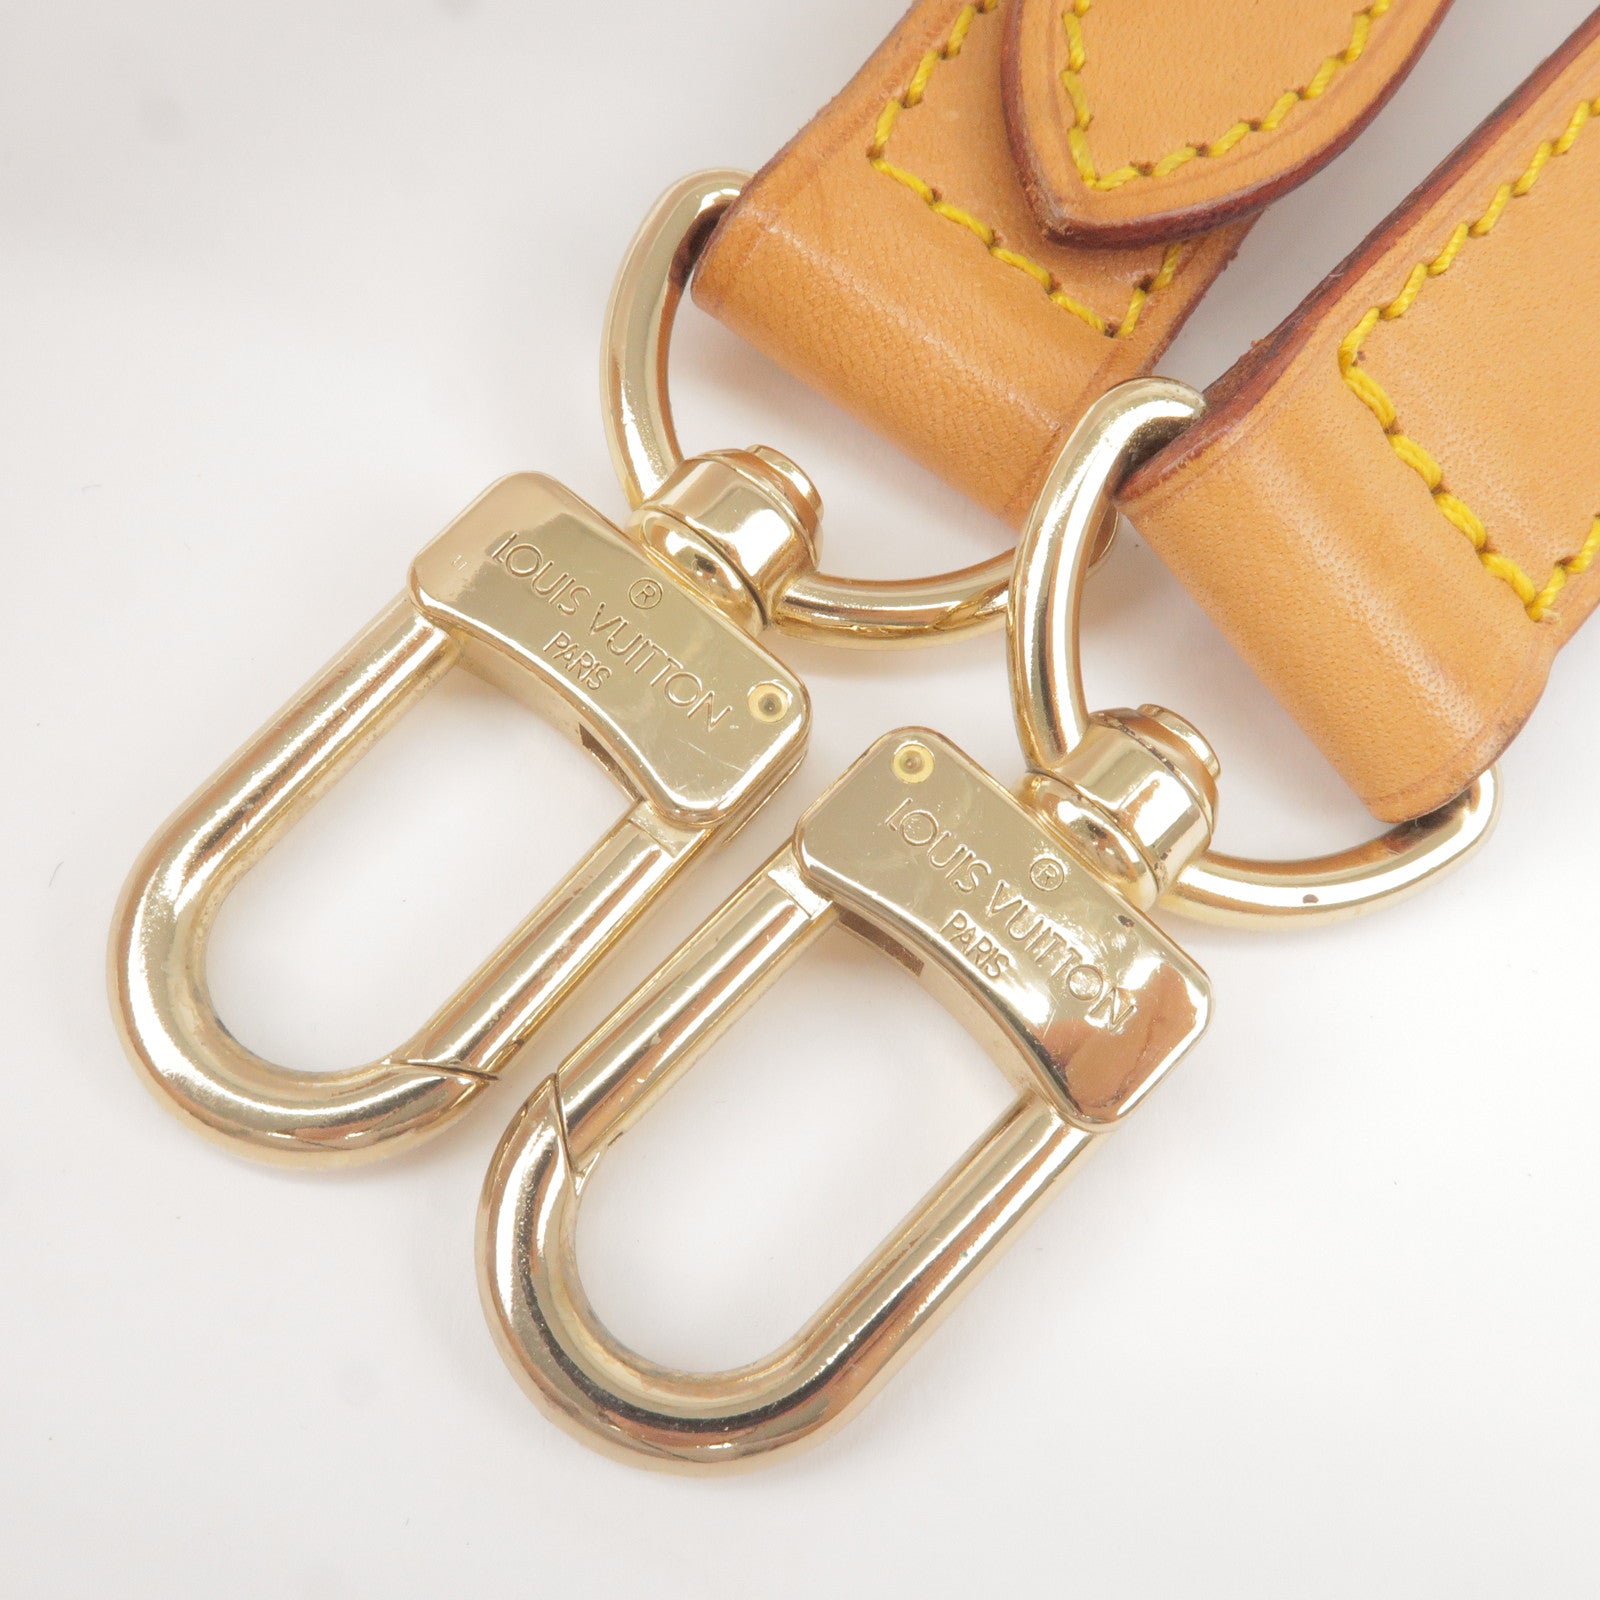 100% Genuine Leather 105CM Bag Strap for LV Neverfull Bags